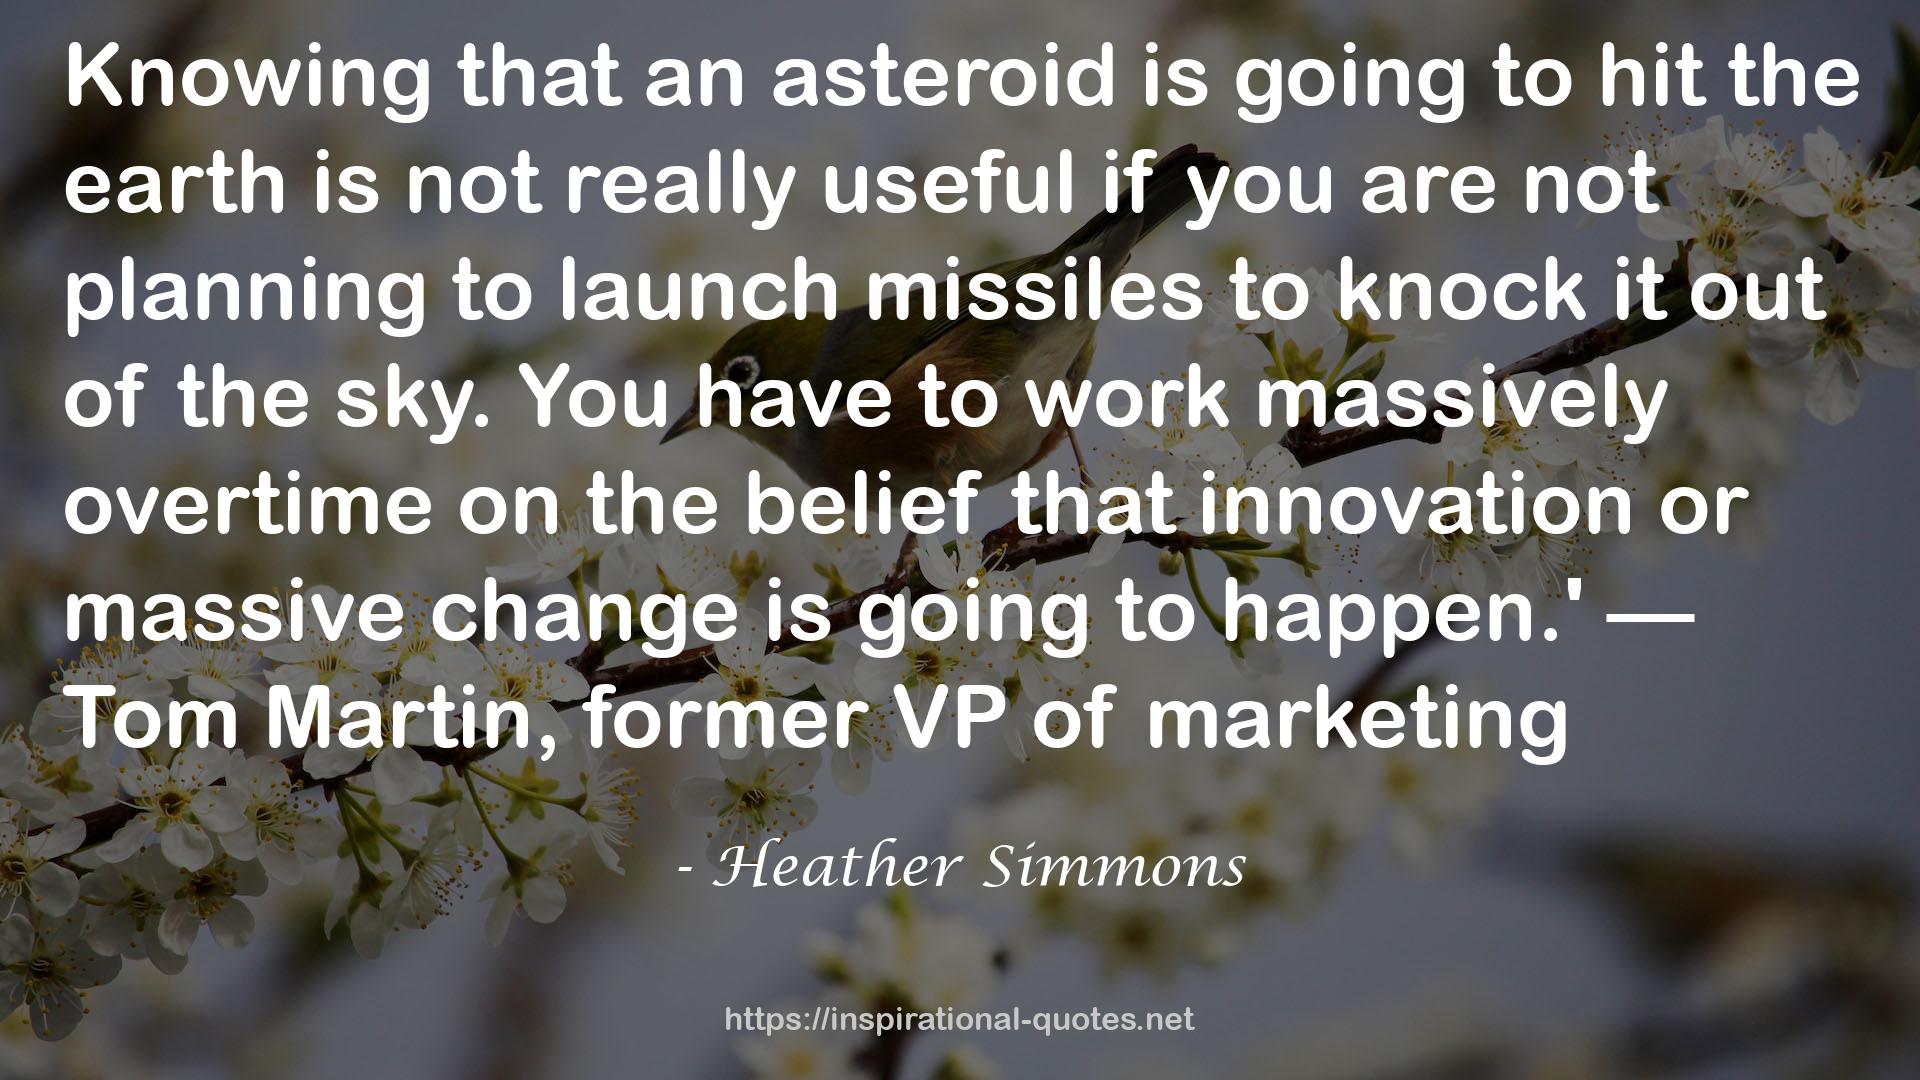 Heather Simmons QUOTES